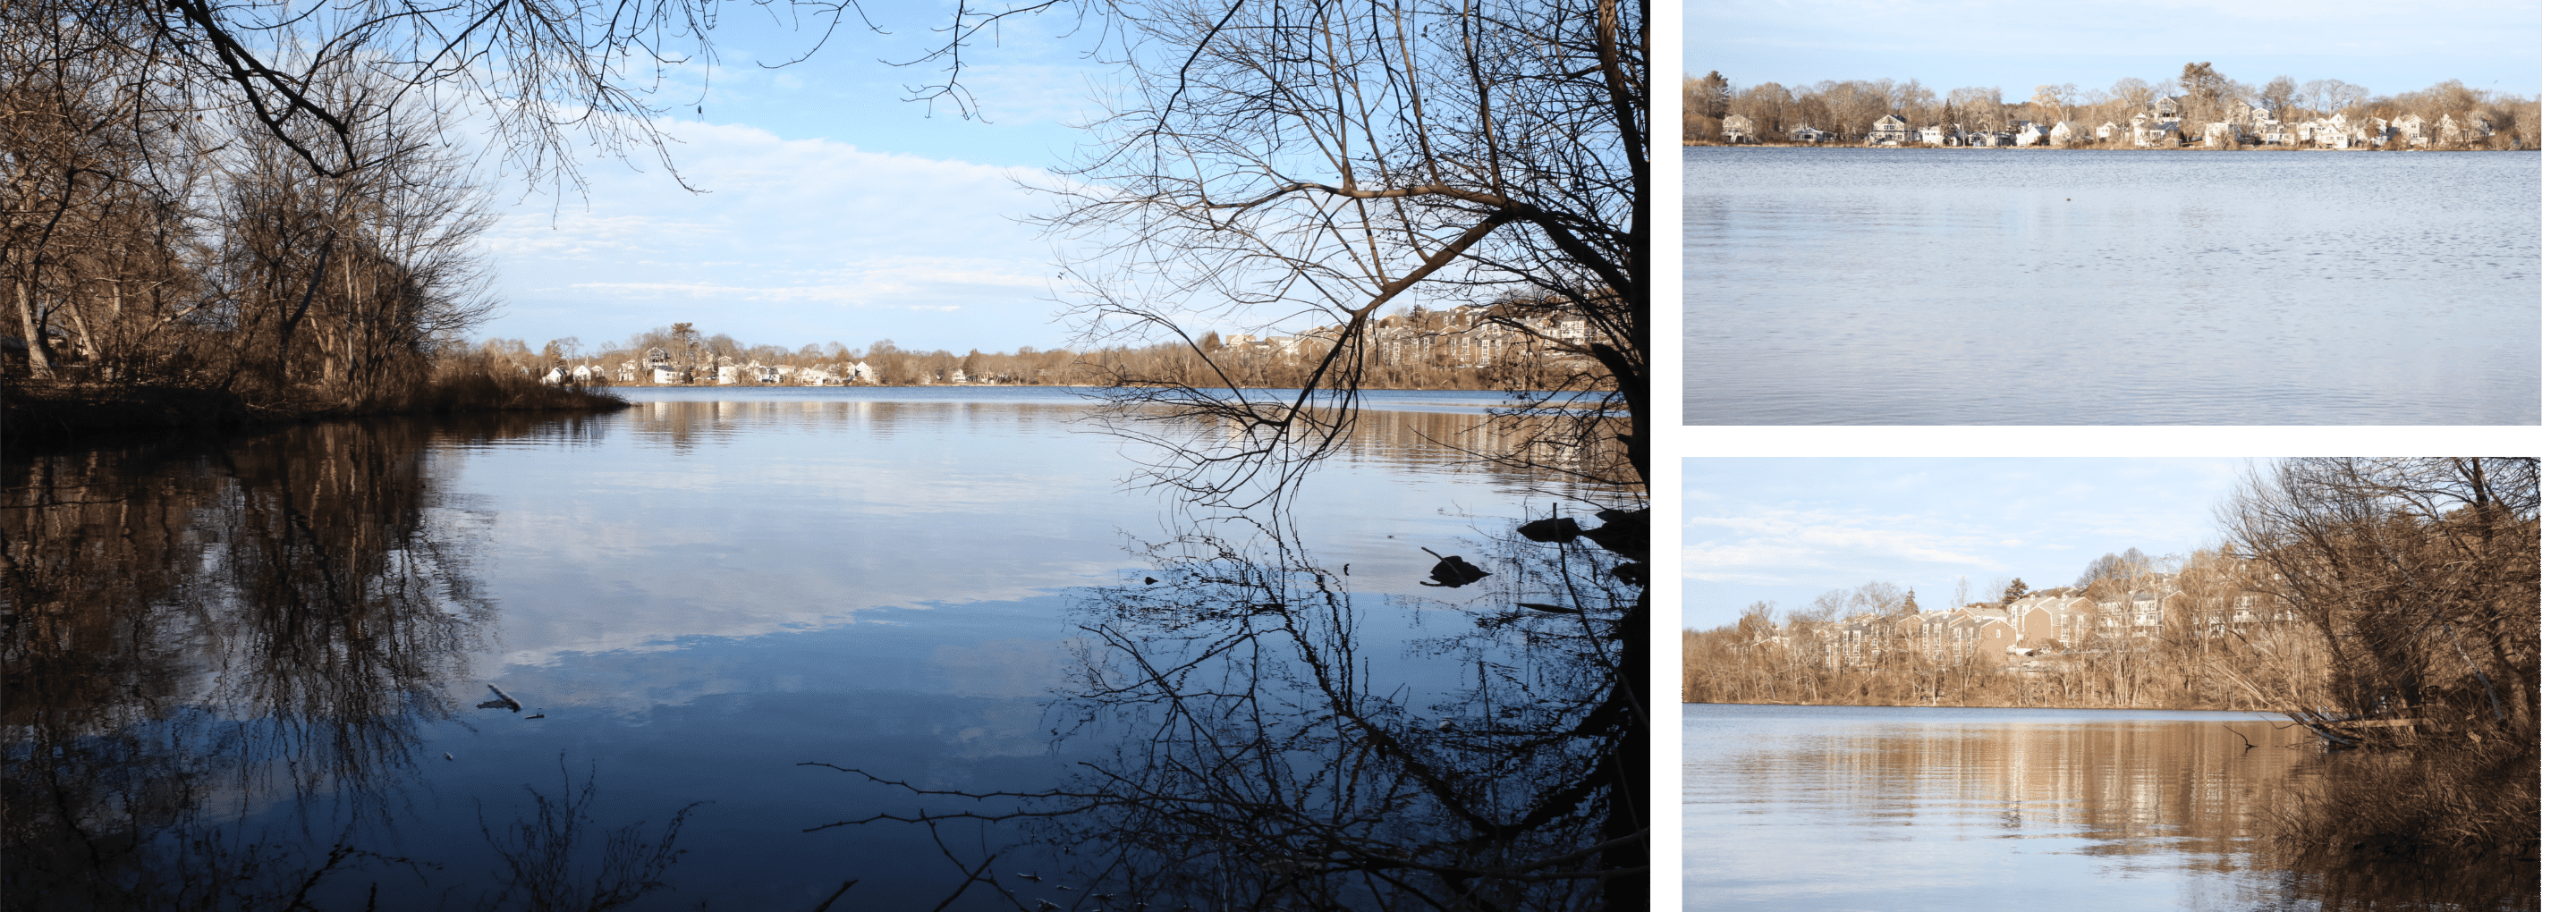 photos of a placid lake surface as viewed from a fishing boat